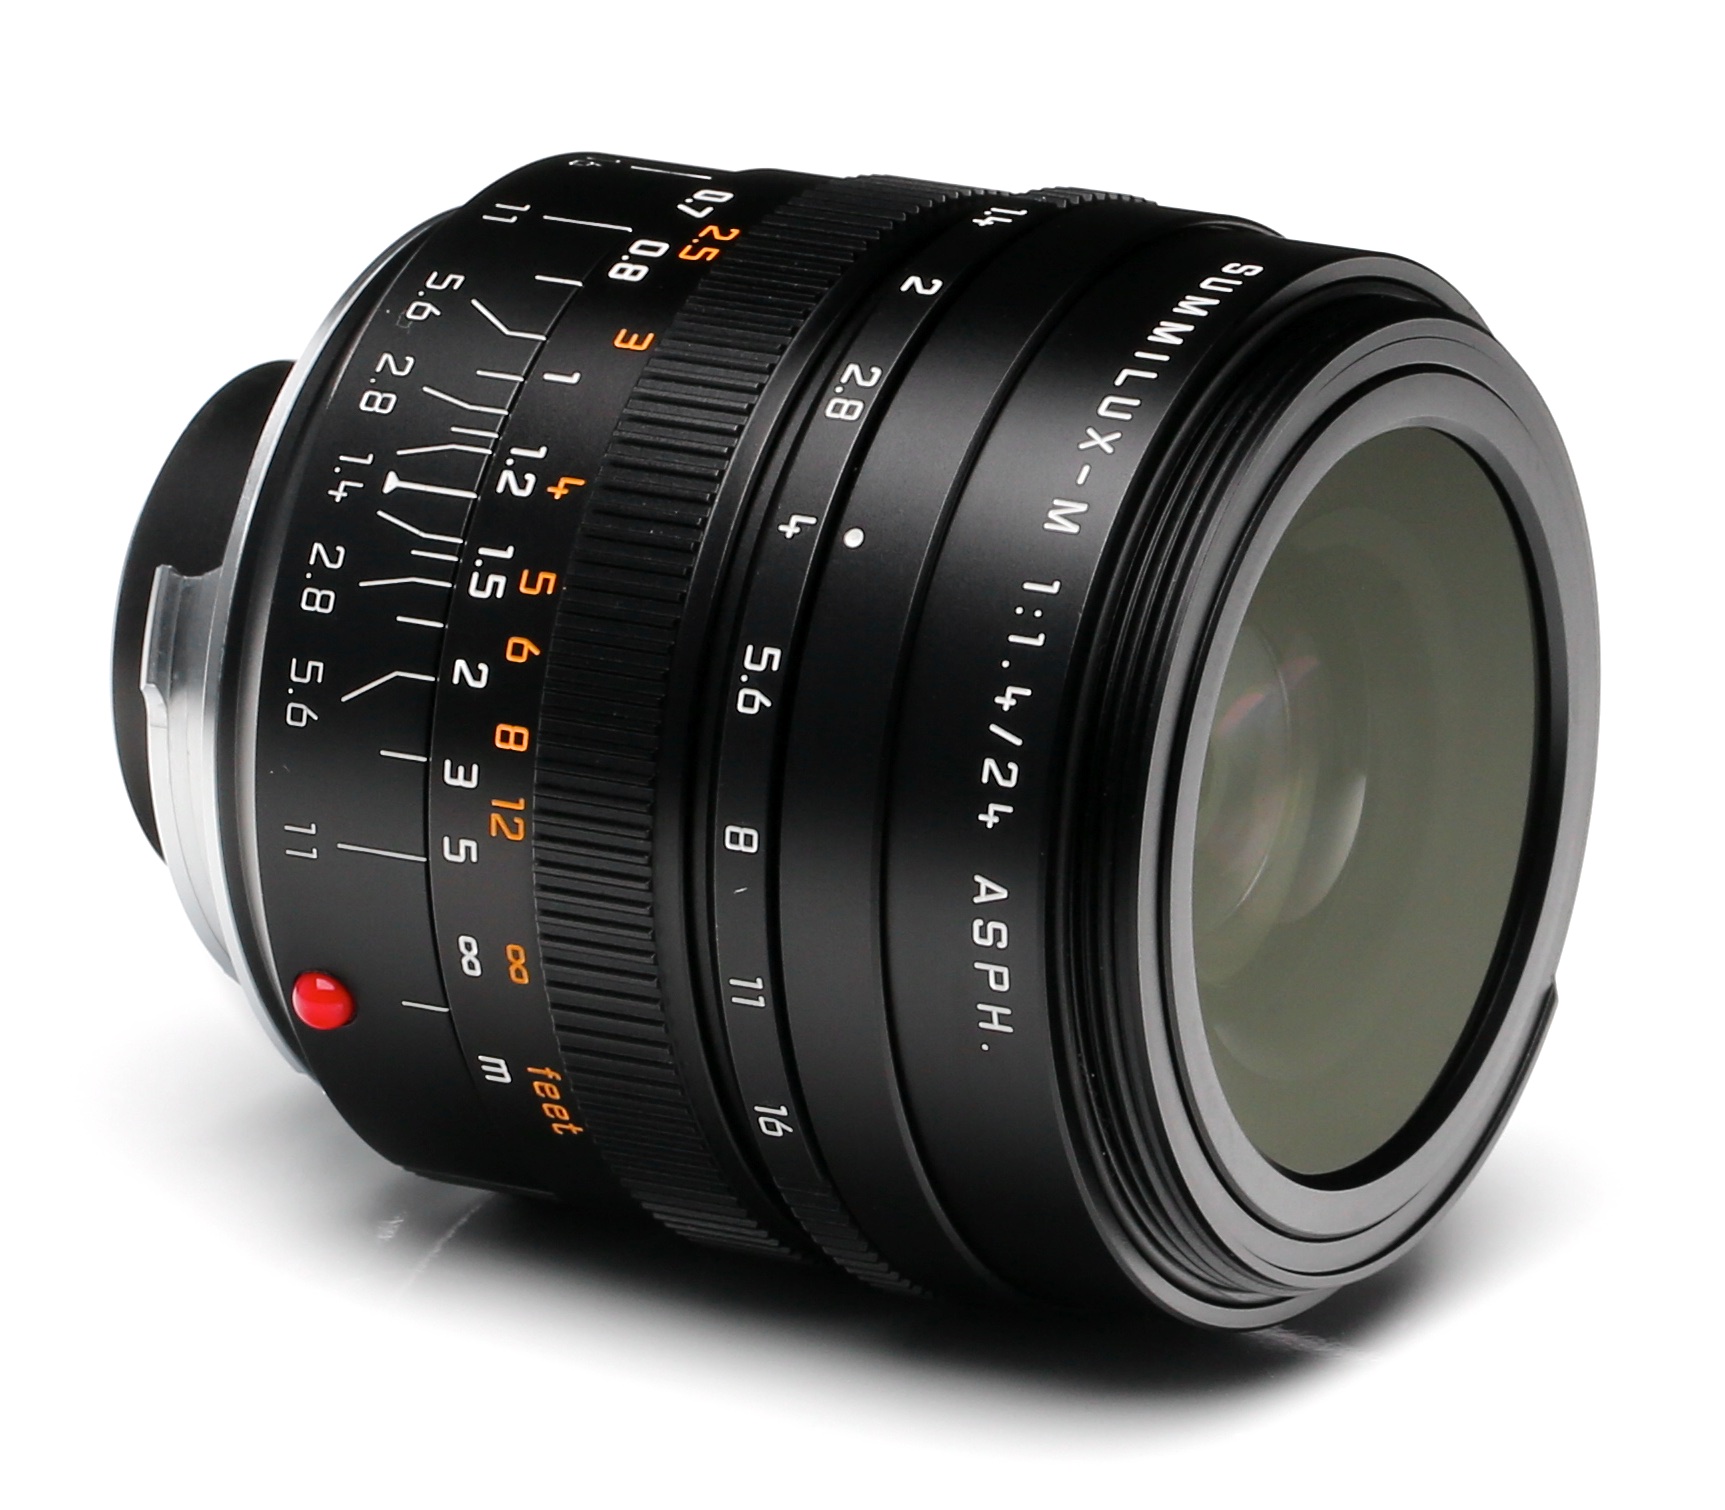 Leica Summilux-M 24mm f1.4 lens review - Leica Photography tutorial - Low Light Photography tips